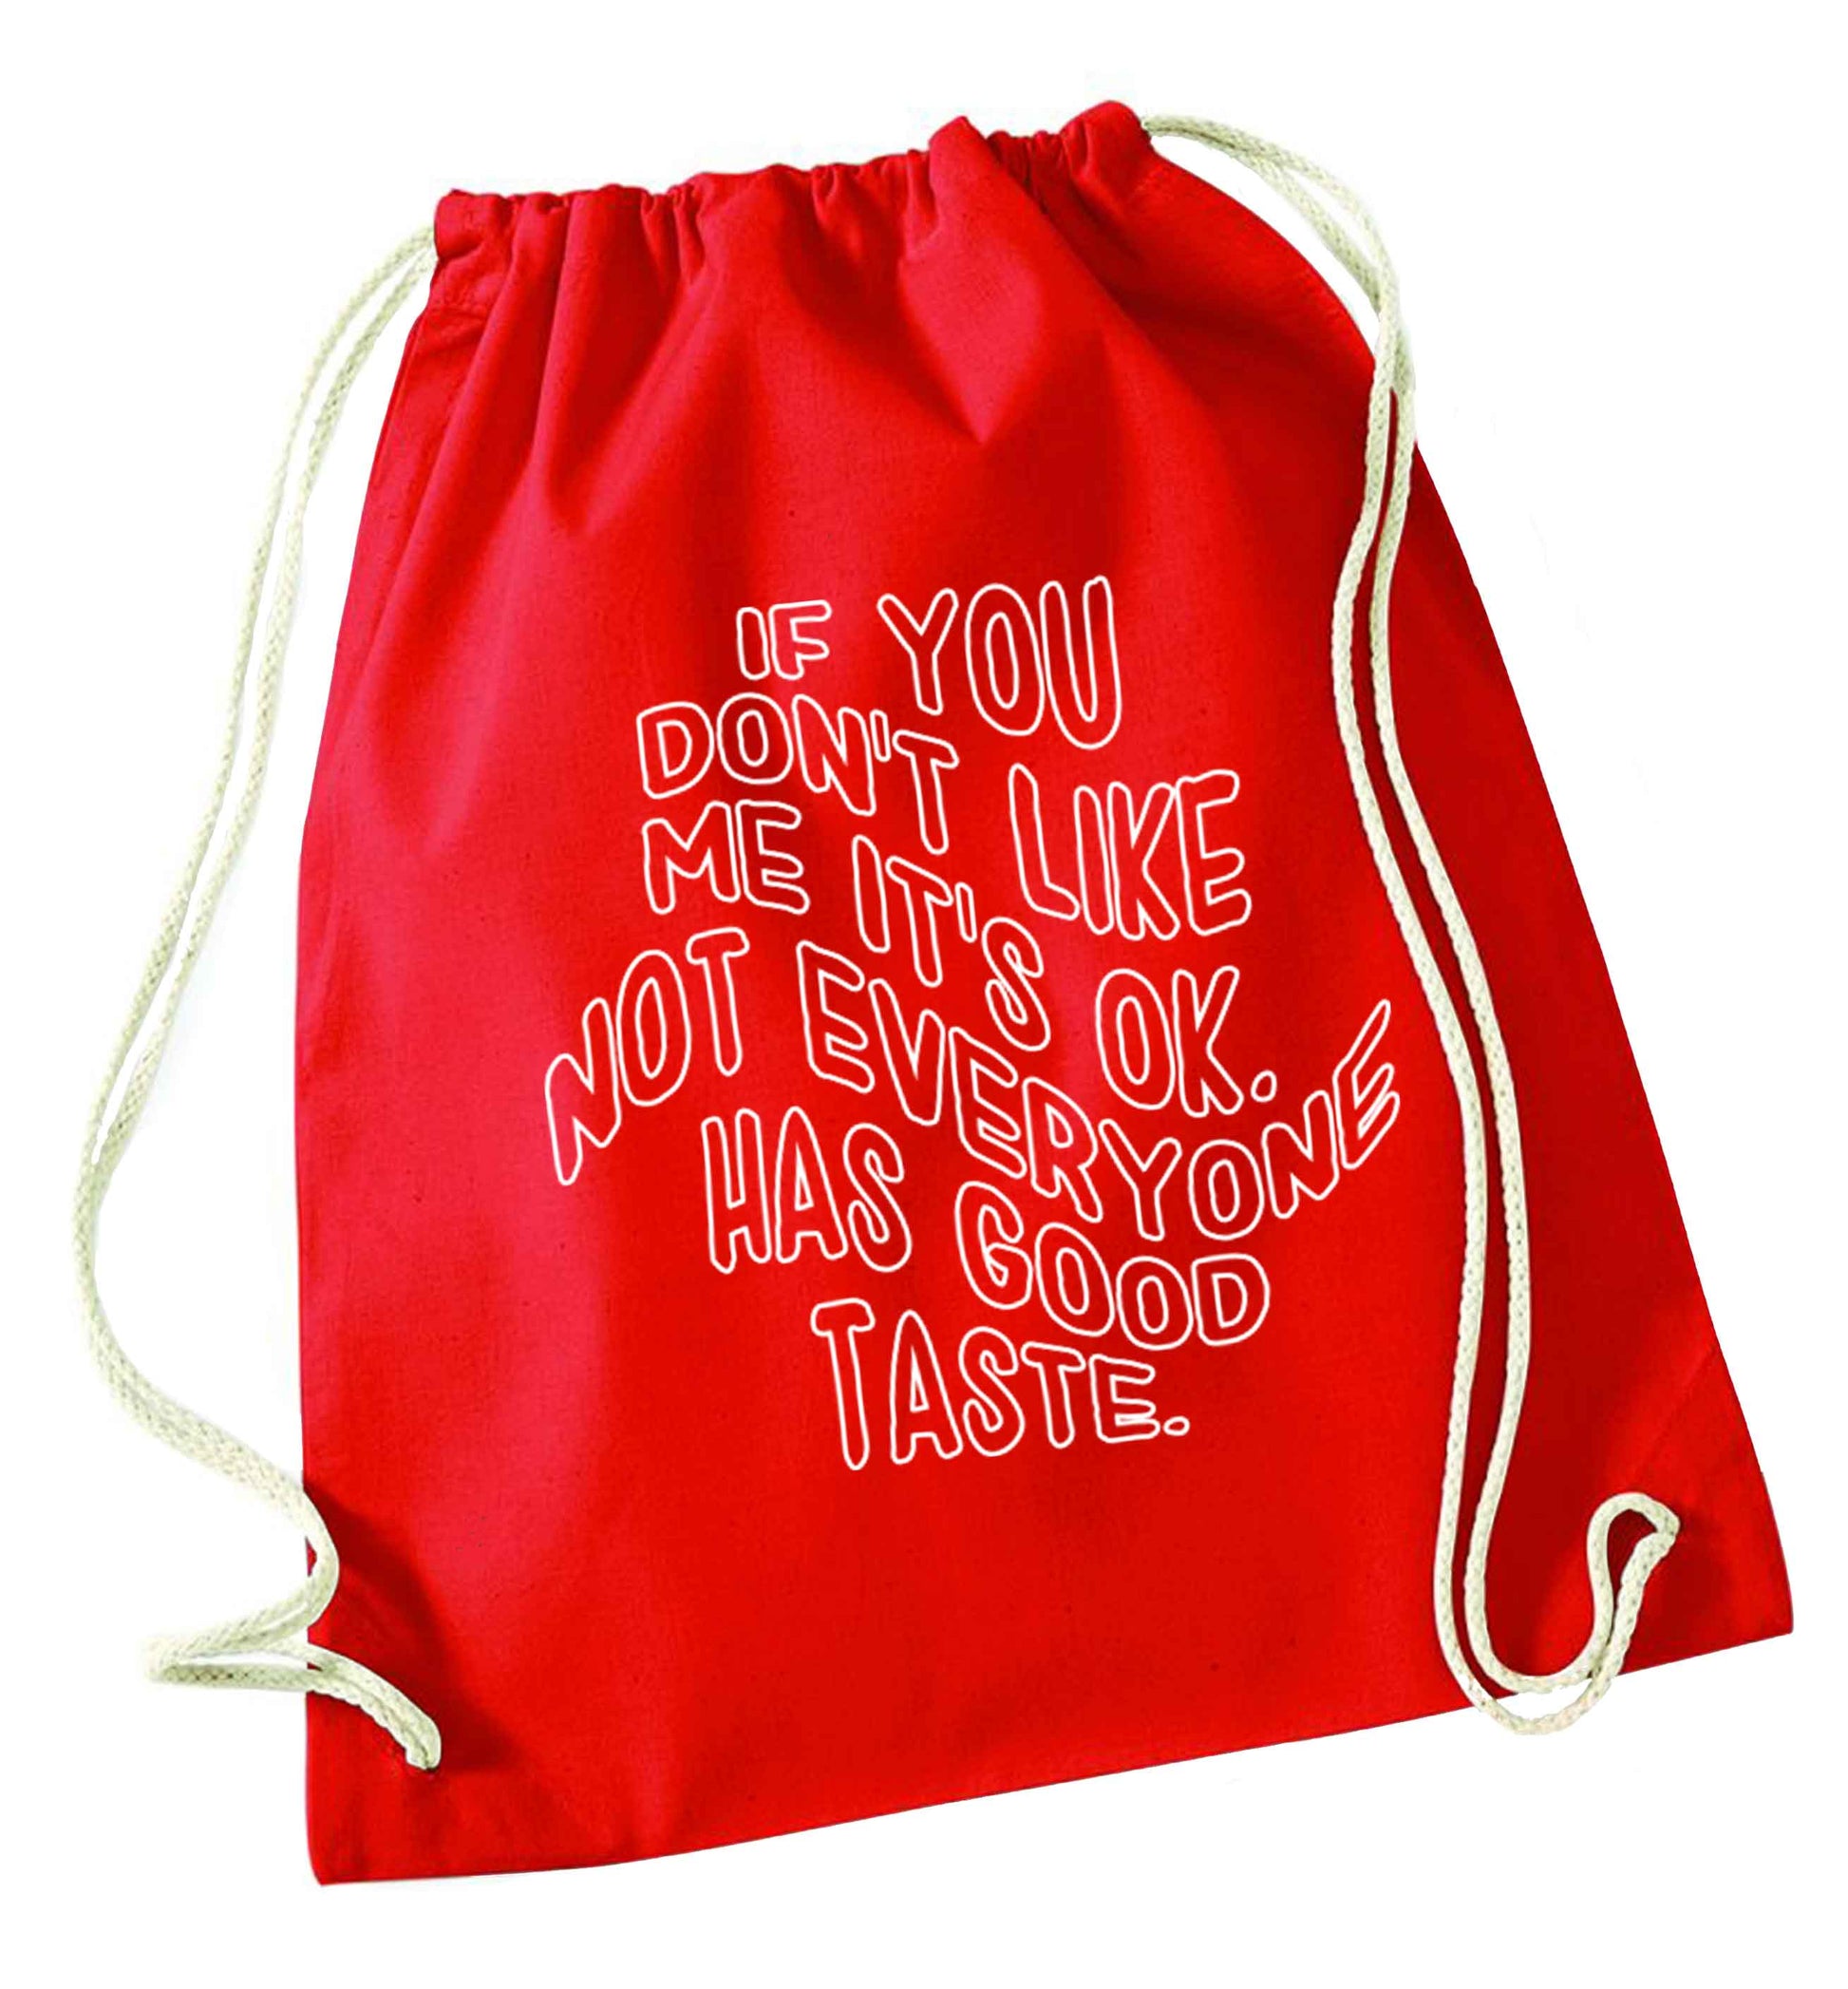 If you don't like me it's ok not everyone has good taste red drawstring bag 